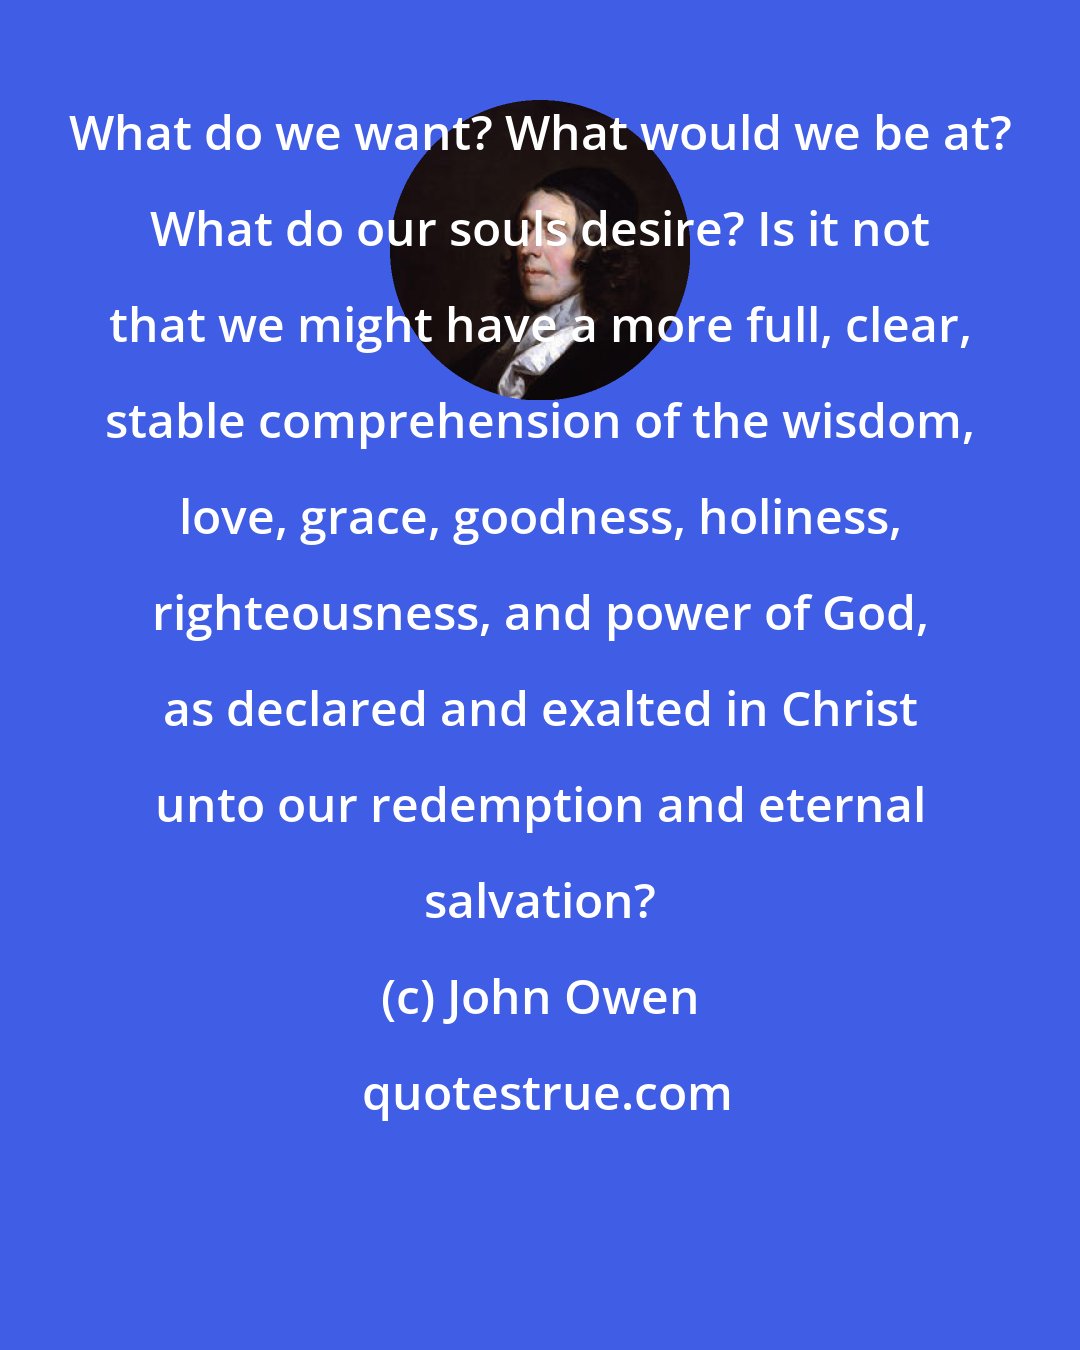 John Owen: What do we want? What would we be at? What do our souls desire? Is it not that we might have a more full, clear, stable comprehension of the wisdom, love, grace, goodness, holiness, righteousness, and power of God, as declared and exalted in Christ unto our redemption and eternal salvation?